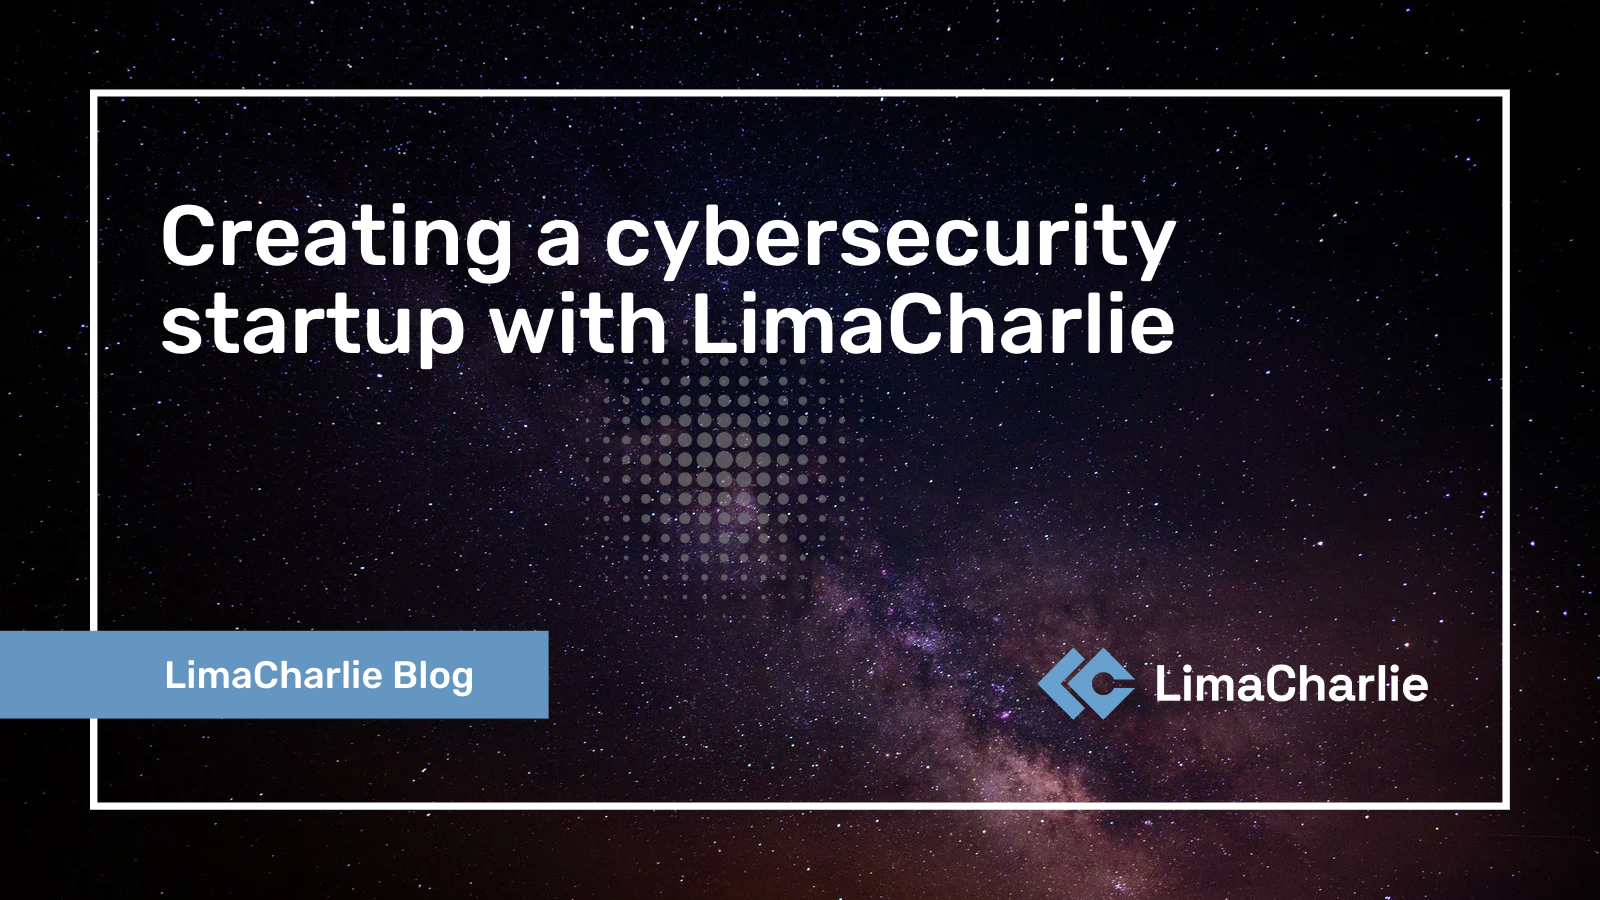 Creating a cybersecurity startup with LimaCharlie